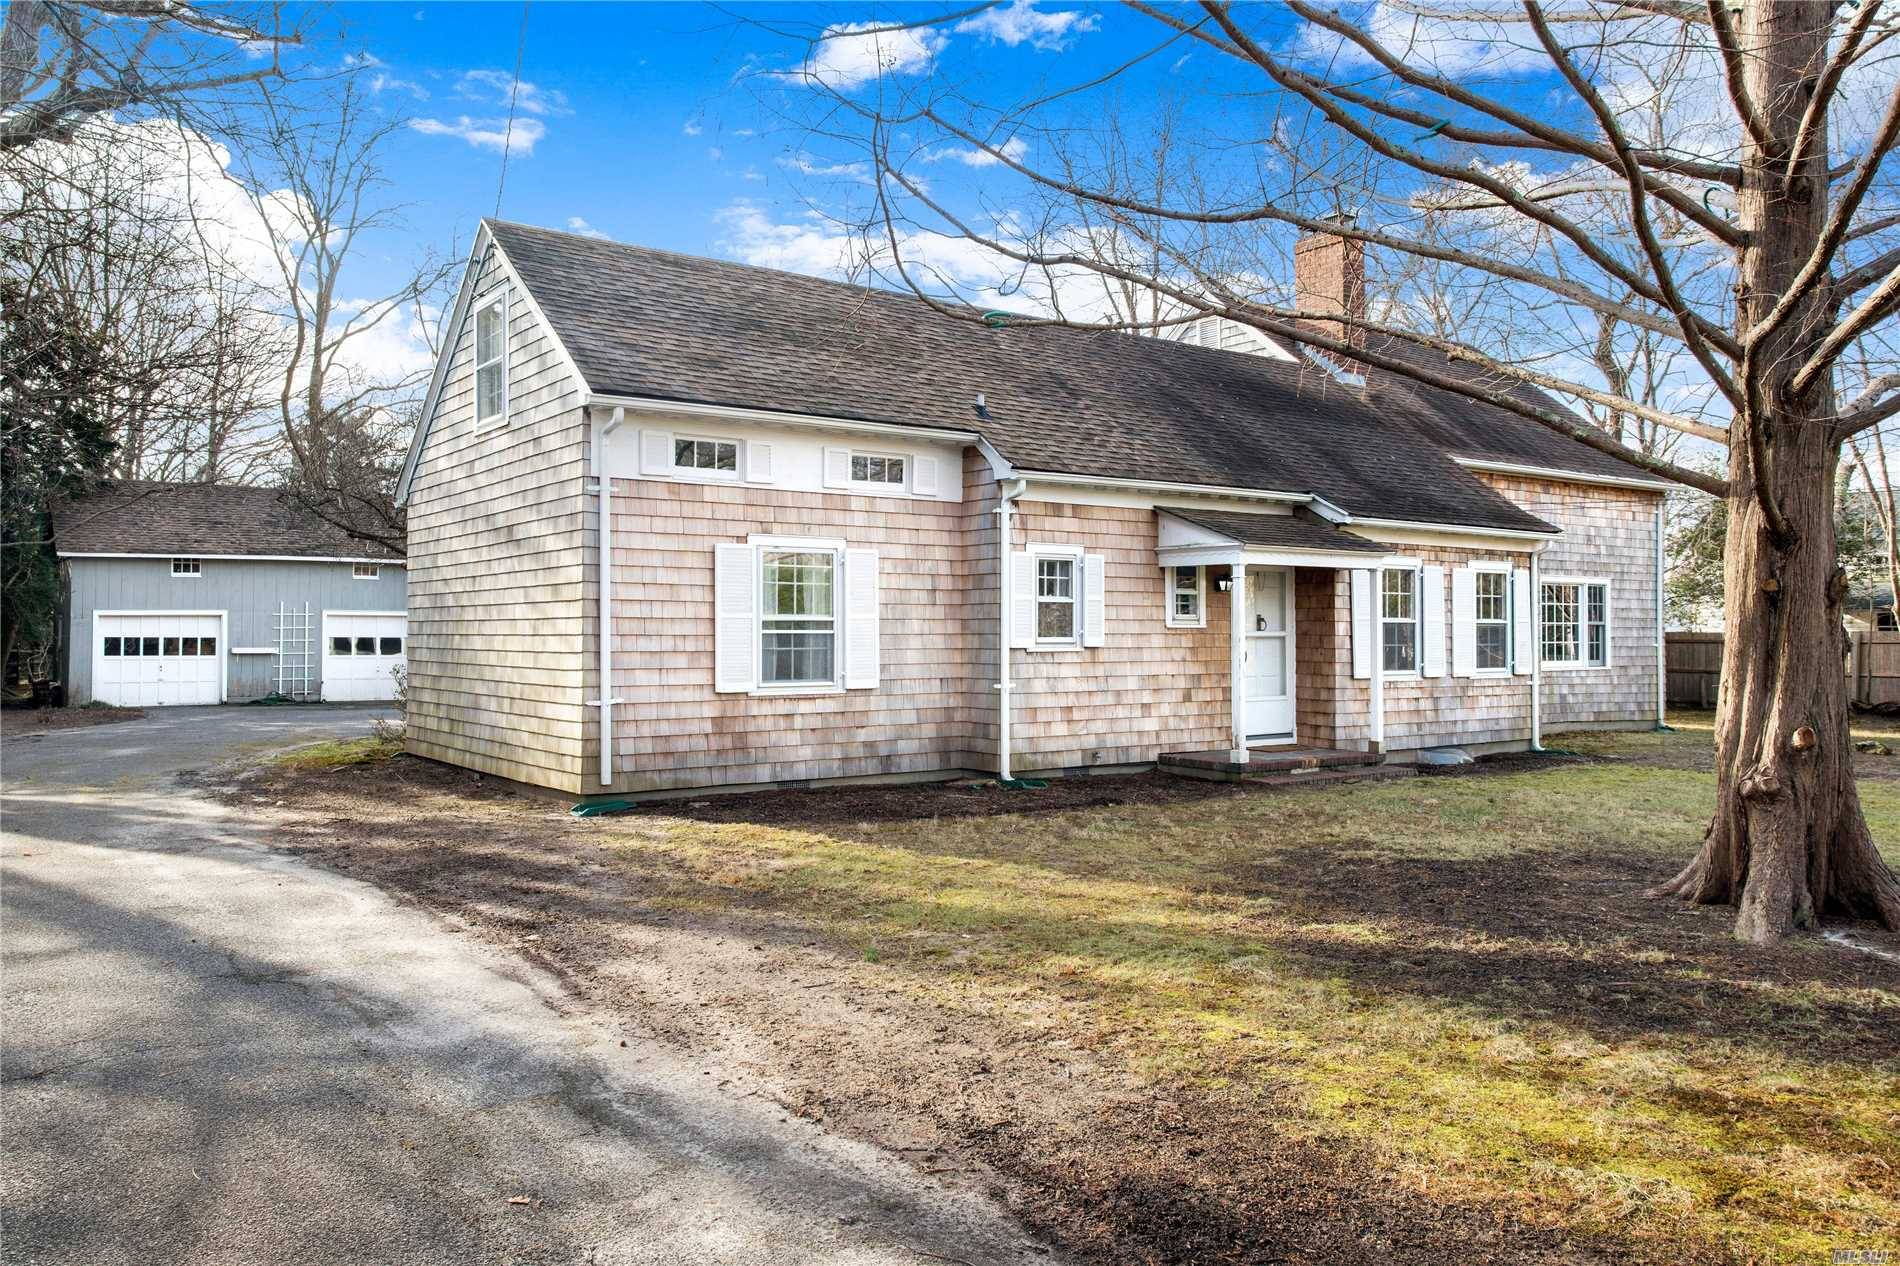 South Country Road, Remsenburg Is The Bucolic Setting For This 1, 944 Sf Cape.